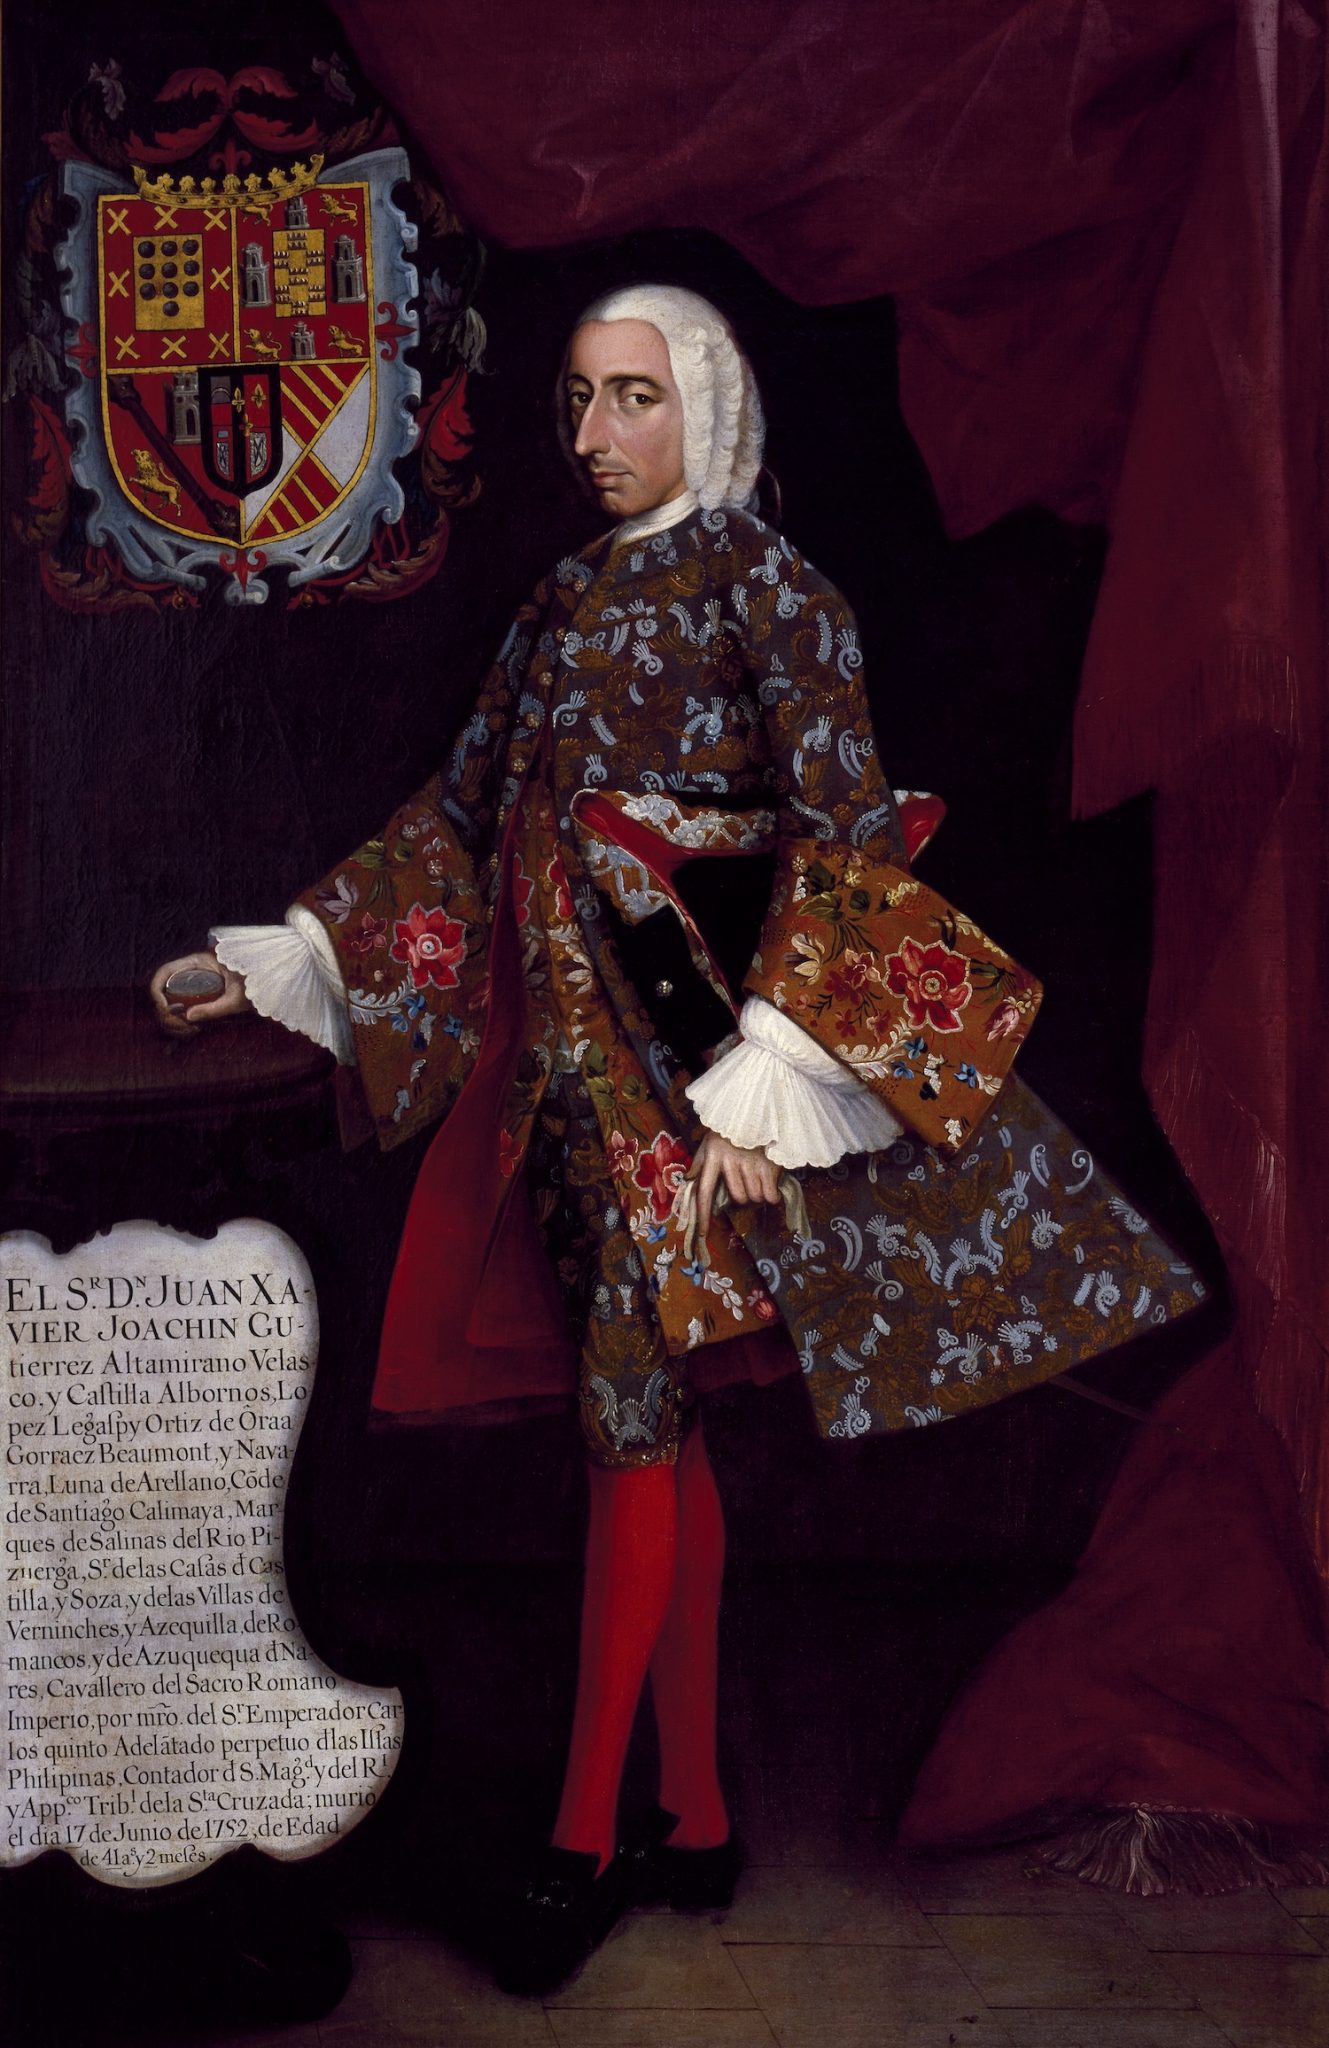 An 18th-century painting of a man wearing a wig and fine clothes, standing in front of a red curtain, with a crest to the left of his head